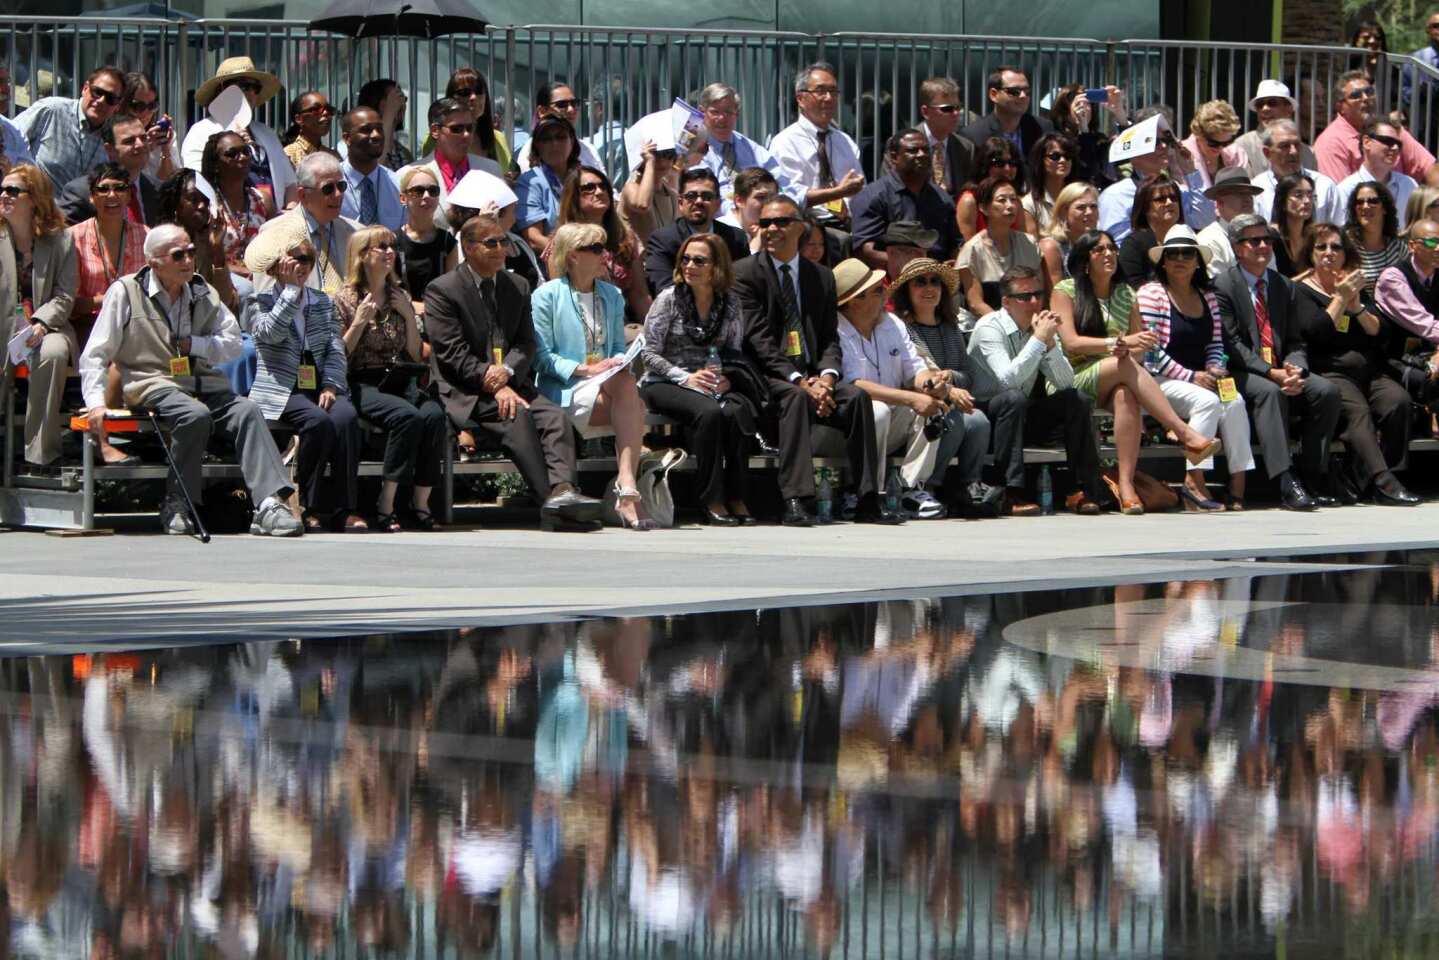 The crowd is reflected in the wading pool during the official opening of two blocks of the new Grand Park.